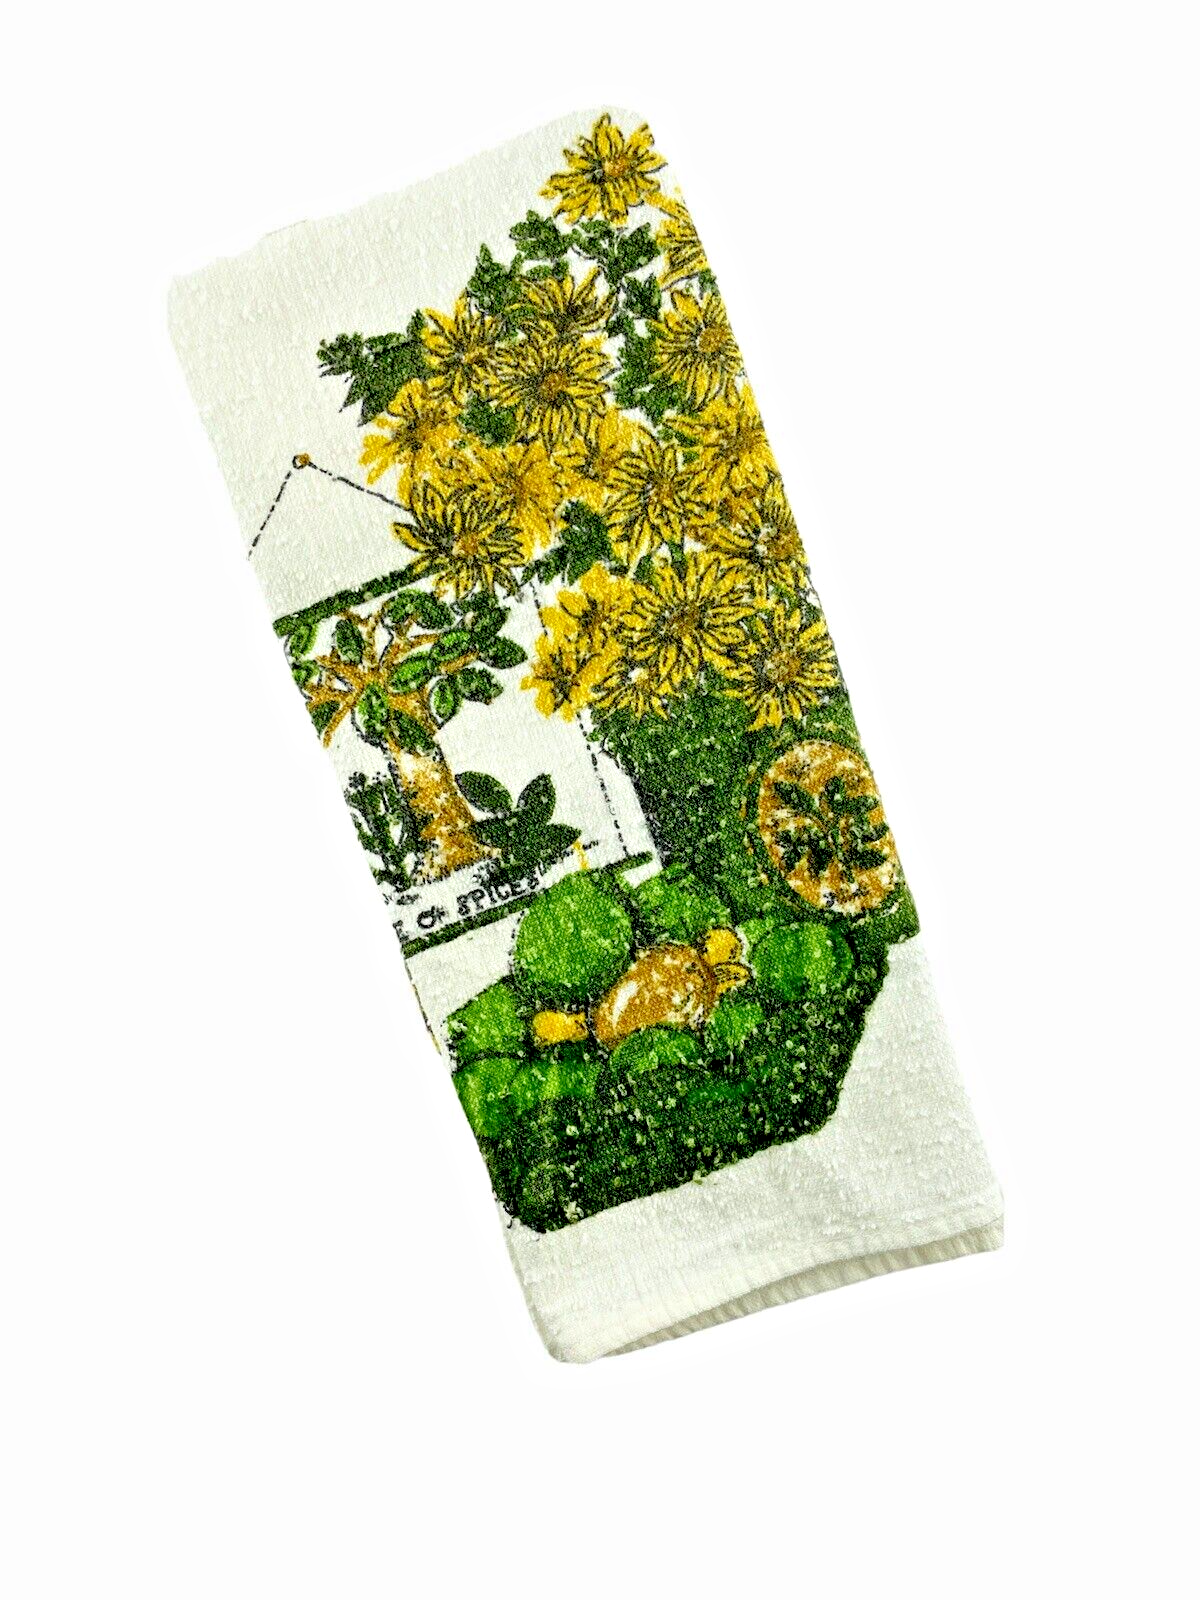 Primary image for Wilendure Tea Towel Dish Towel Absorbent Lintless Cotton Still Life Print Floral